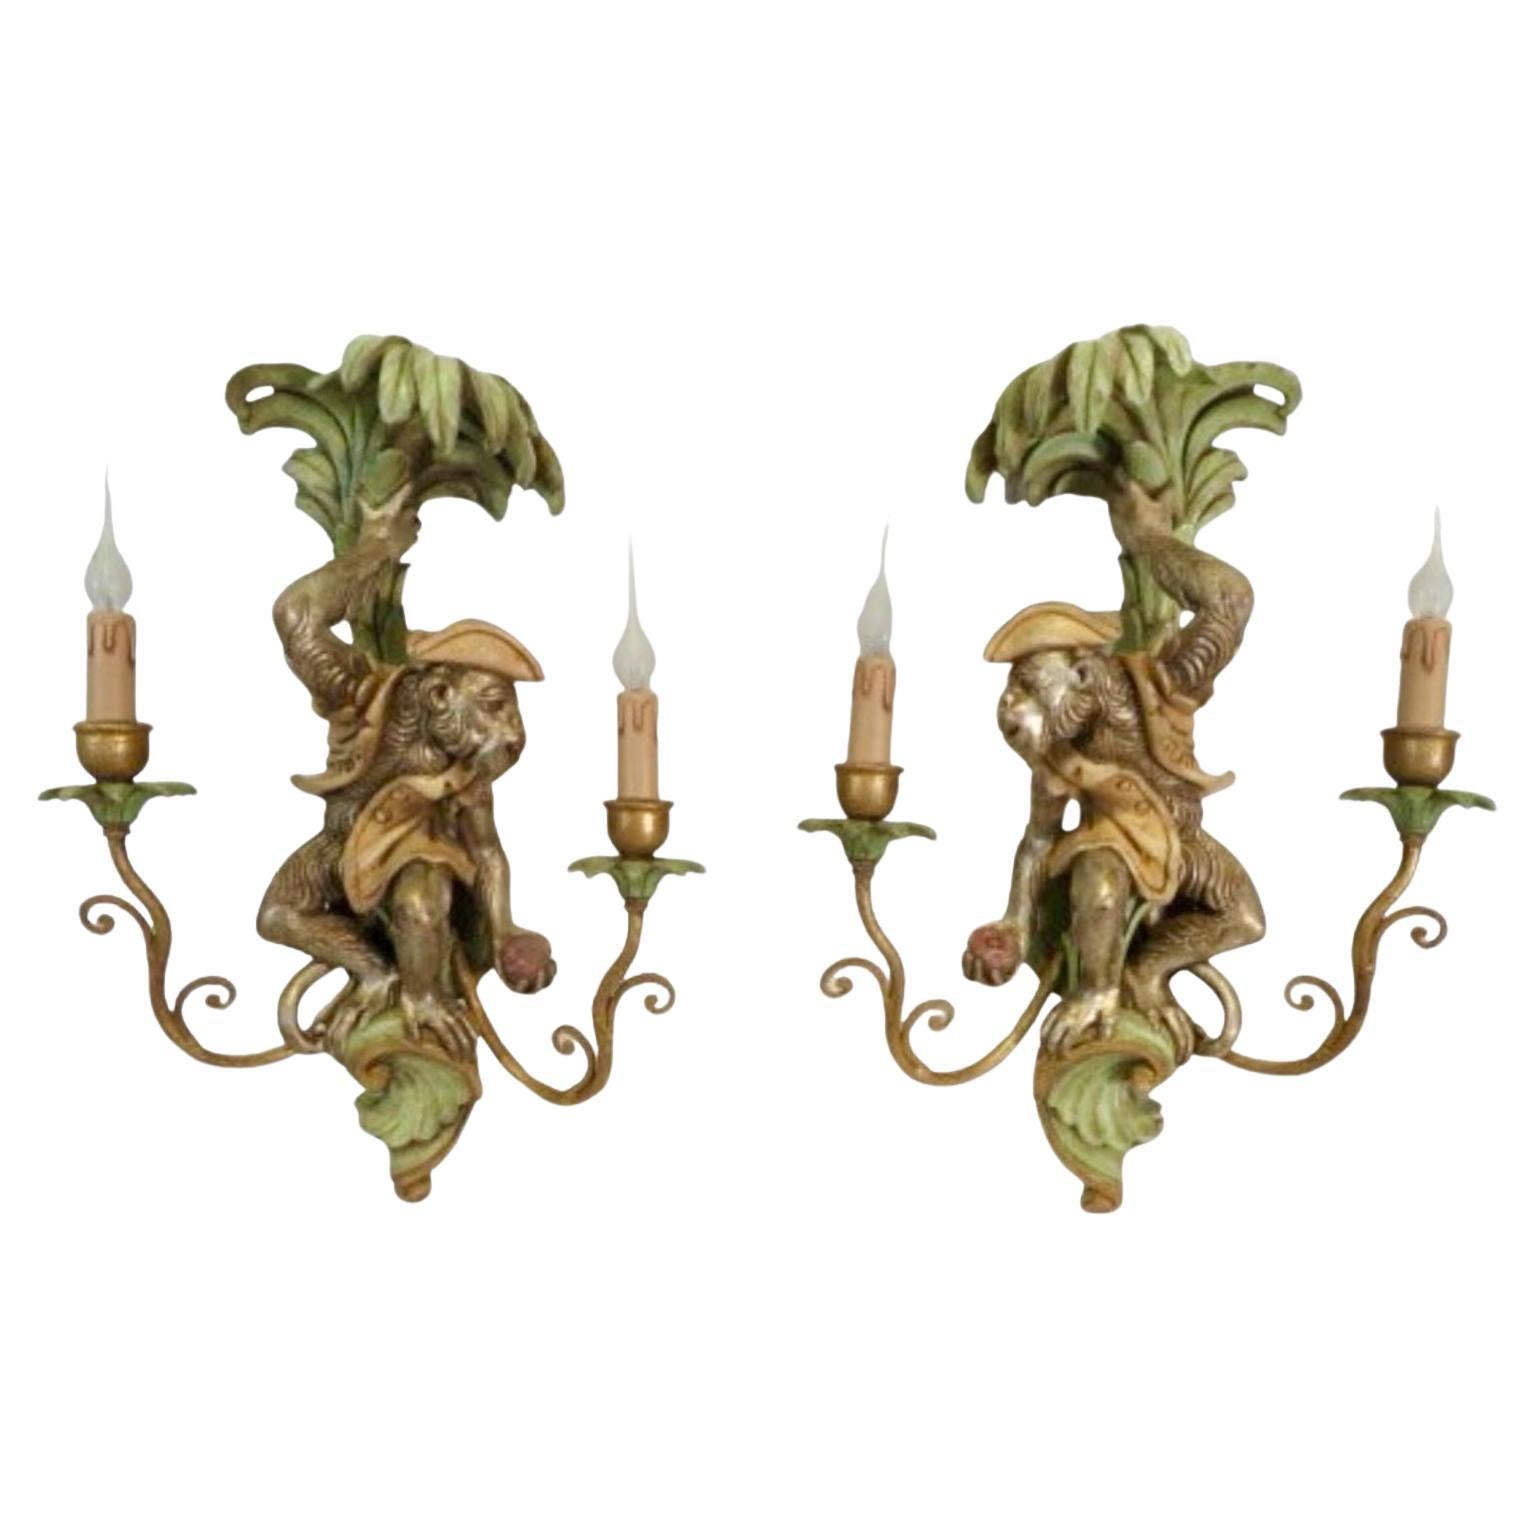 This is a fabulous pair of Regency style Italian carved wood and hand painted monkey in palm tree sconces by Decorative Crafts. They are in working order.